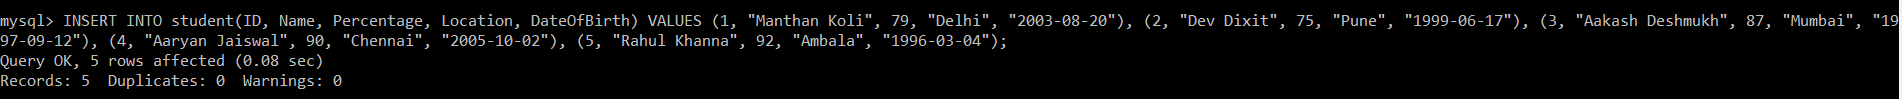 SQL get month from the date